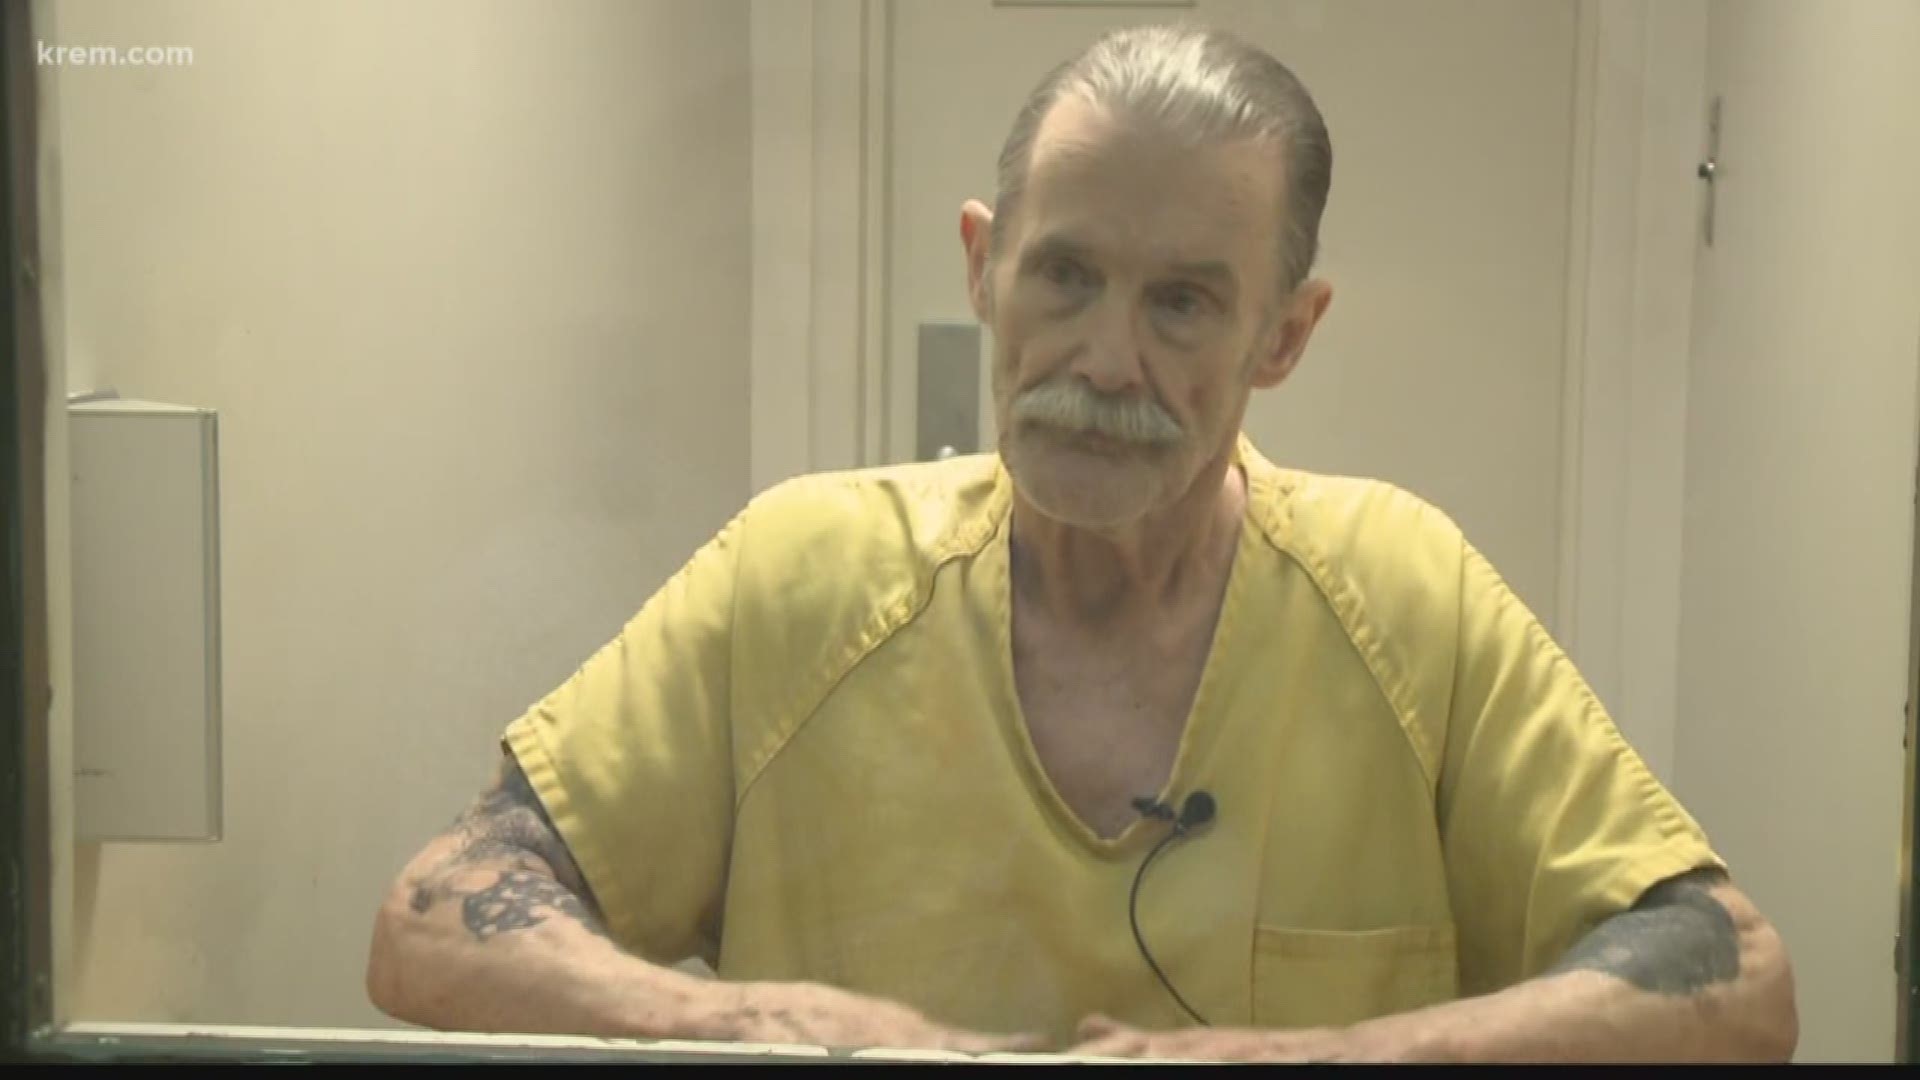 72yearold Spokane inmate takes plea deal after over 2 years of